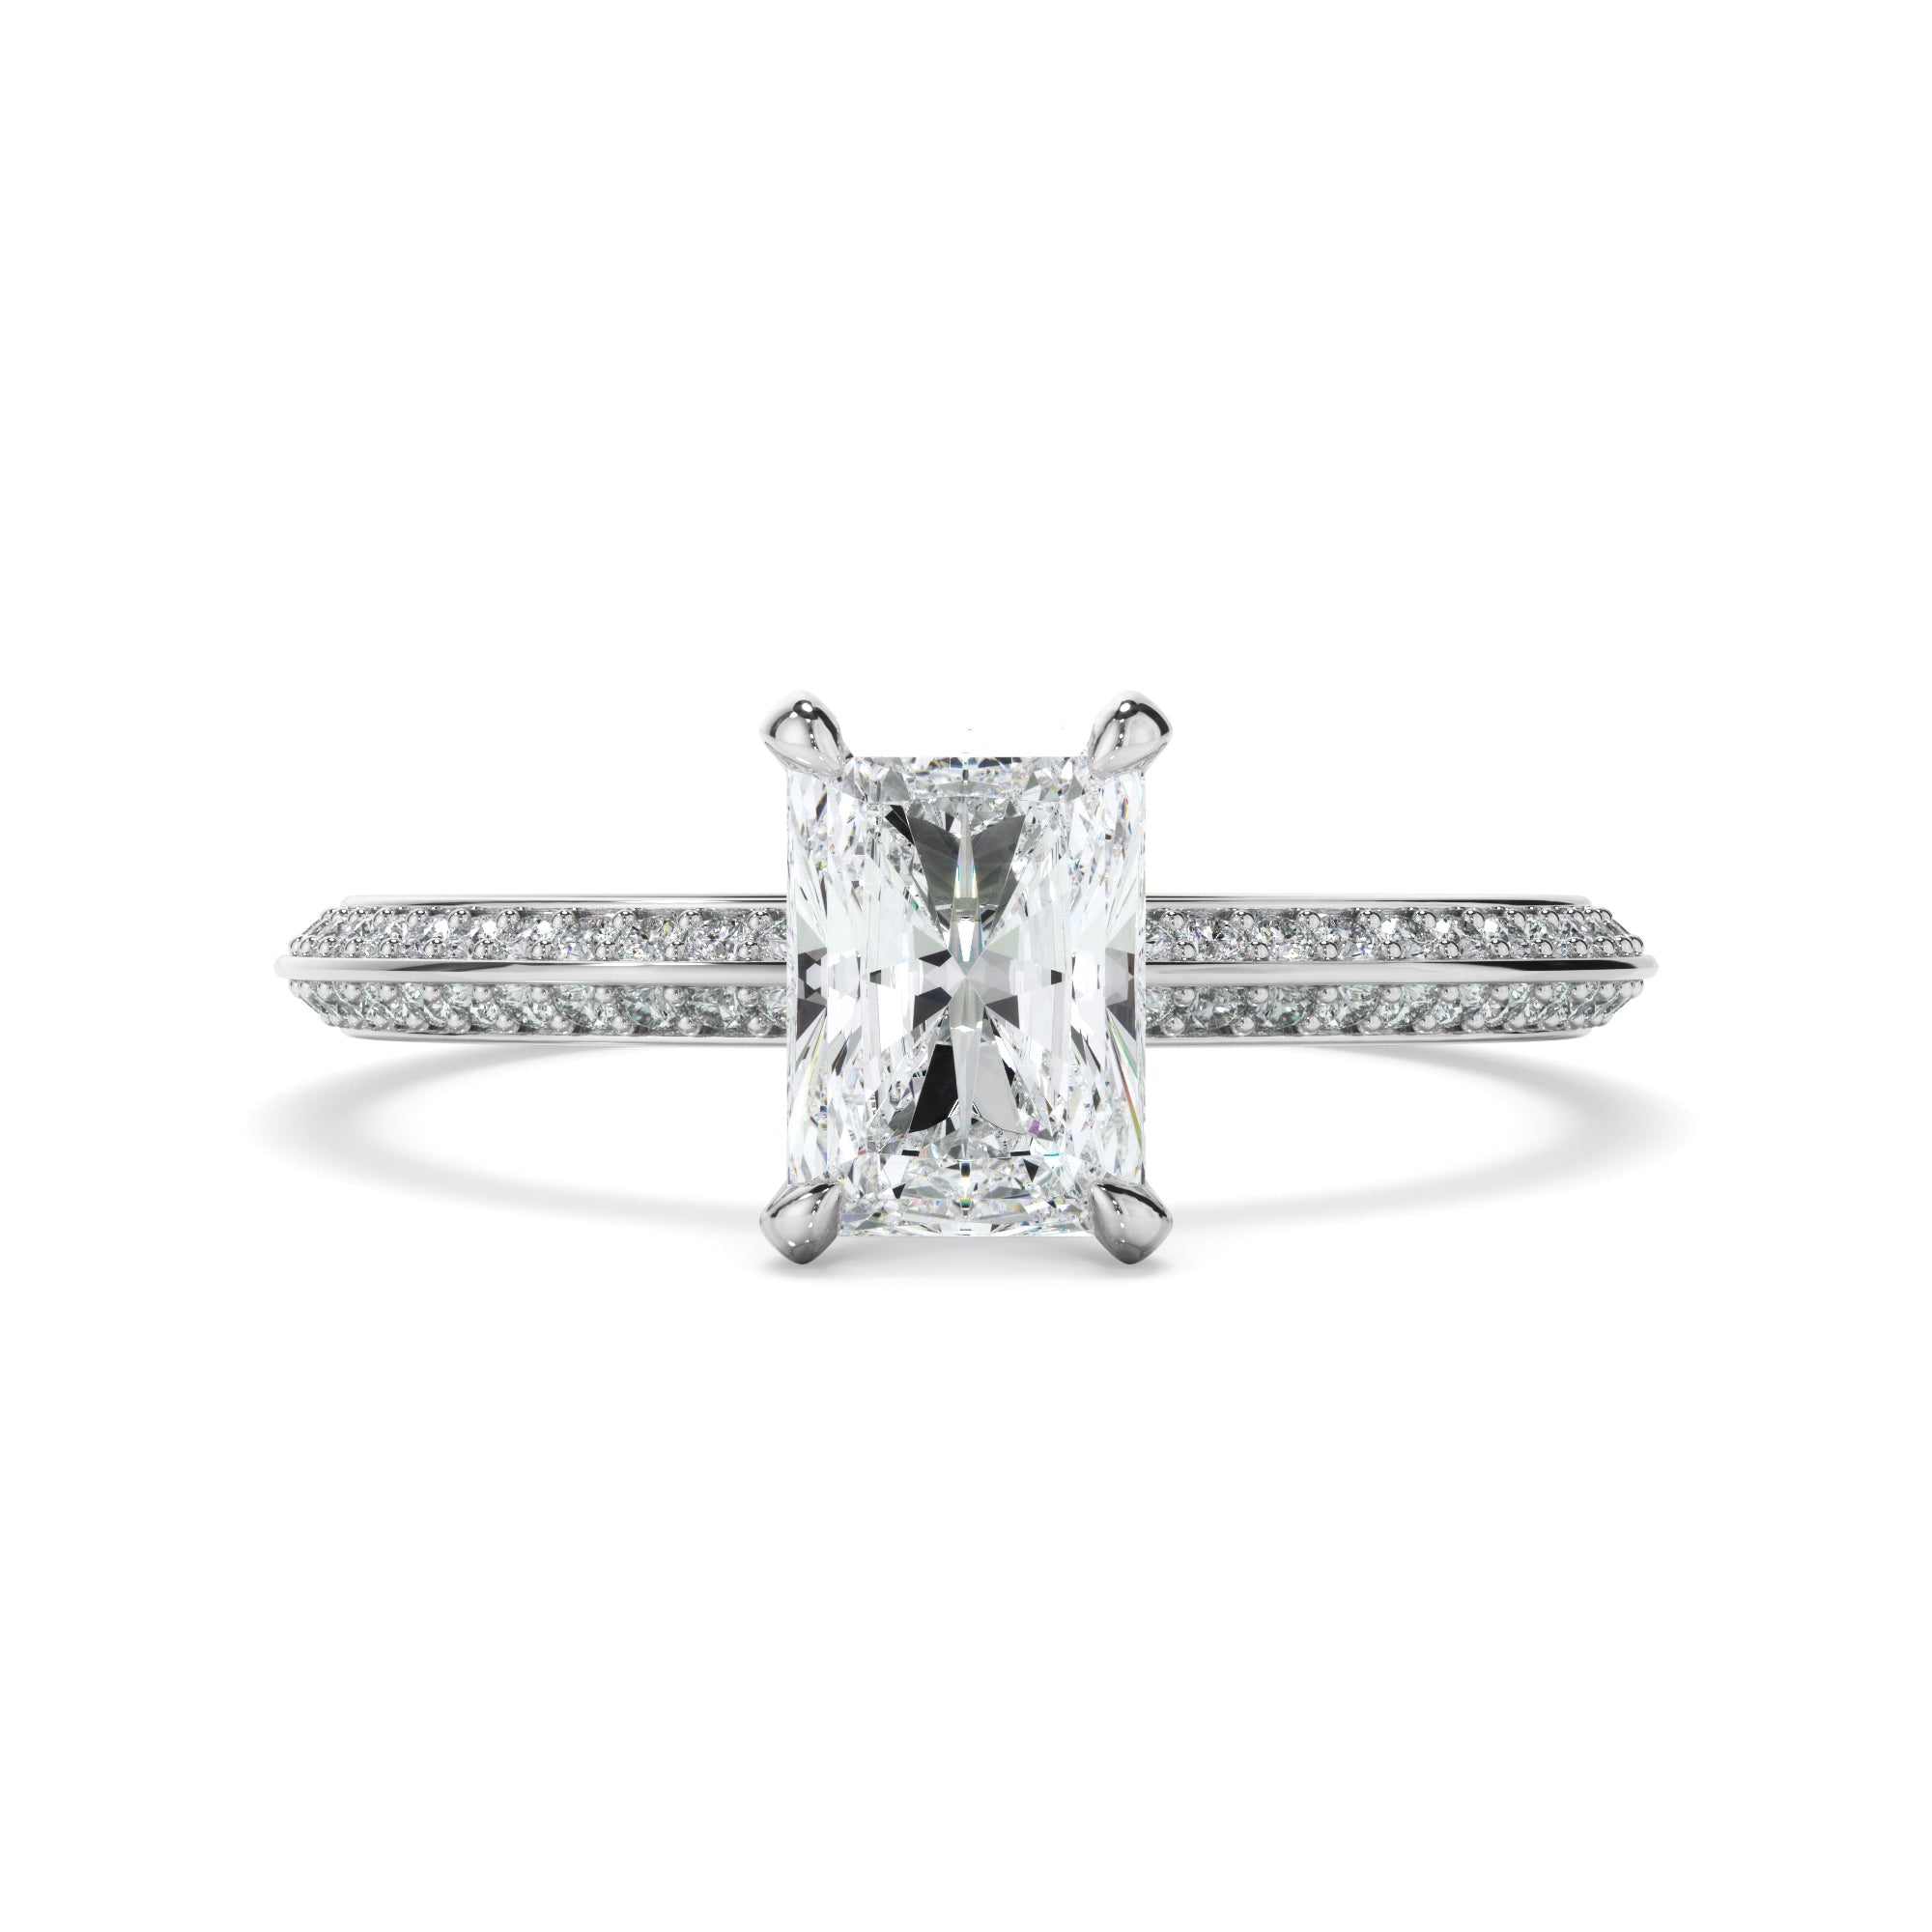 Radiant Cut Diamond Knife Edge Engagement Ring With Diamond Pave Sides